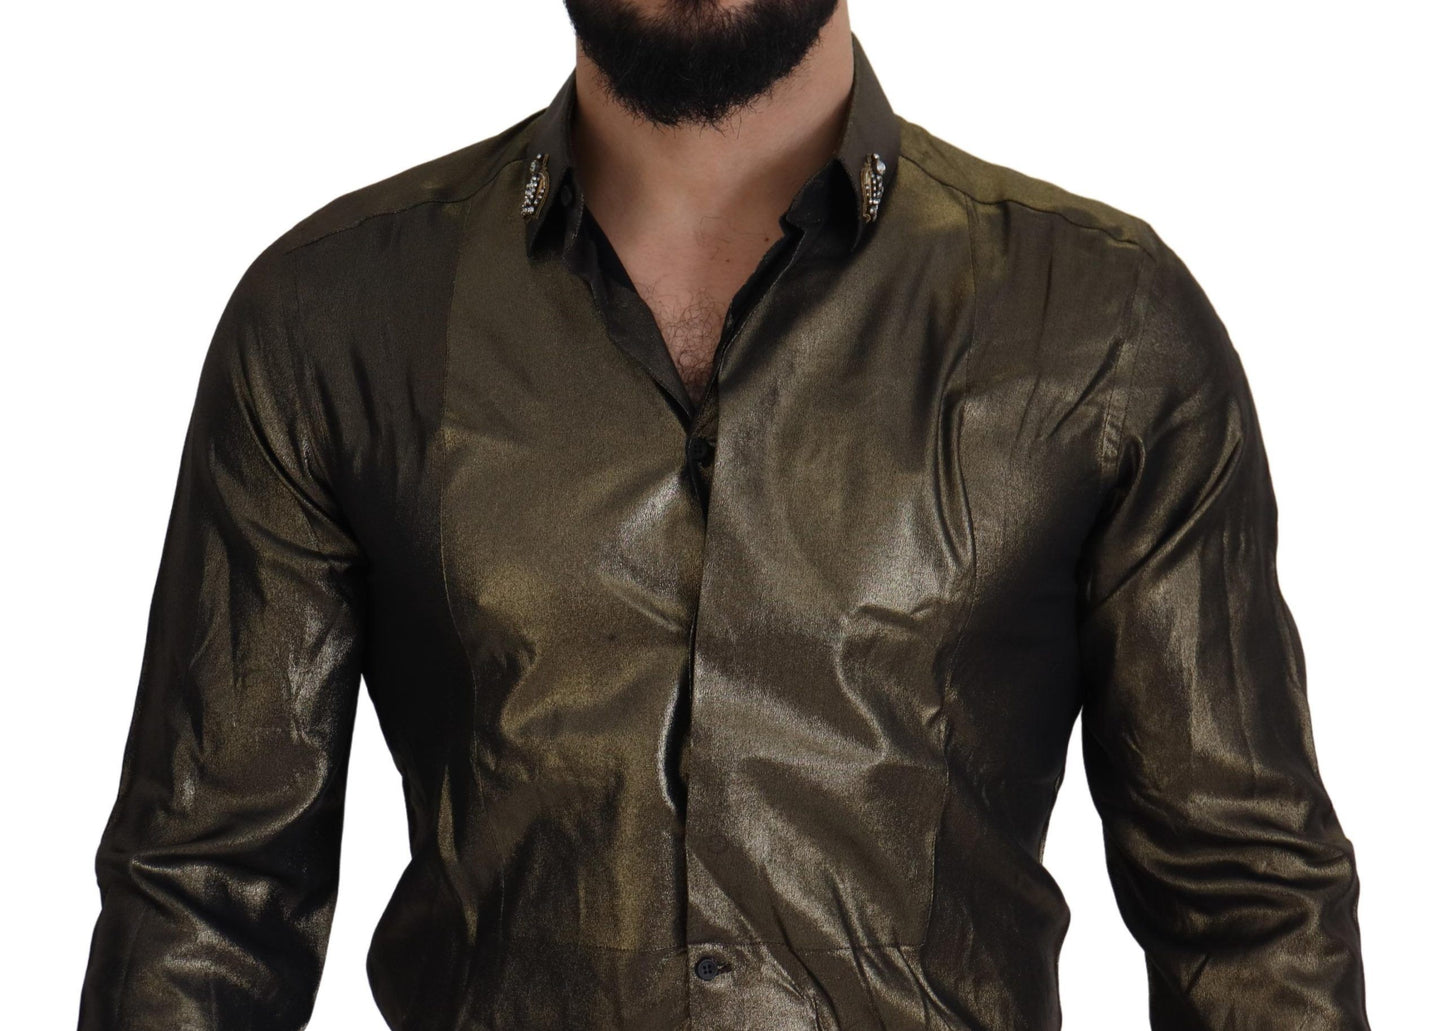 Elegant Gold Slim Fit Shirt with Crown Embroidery